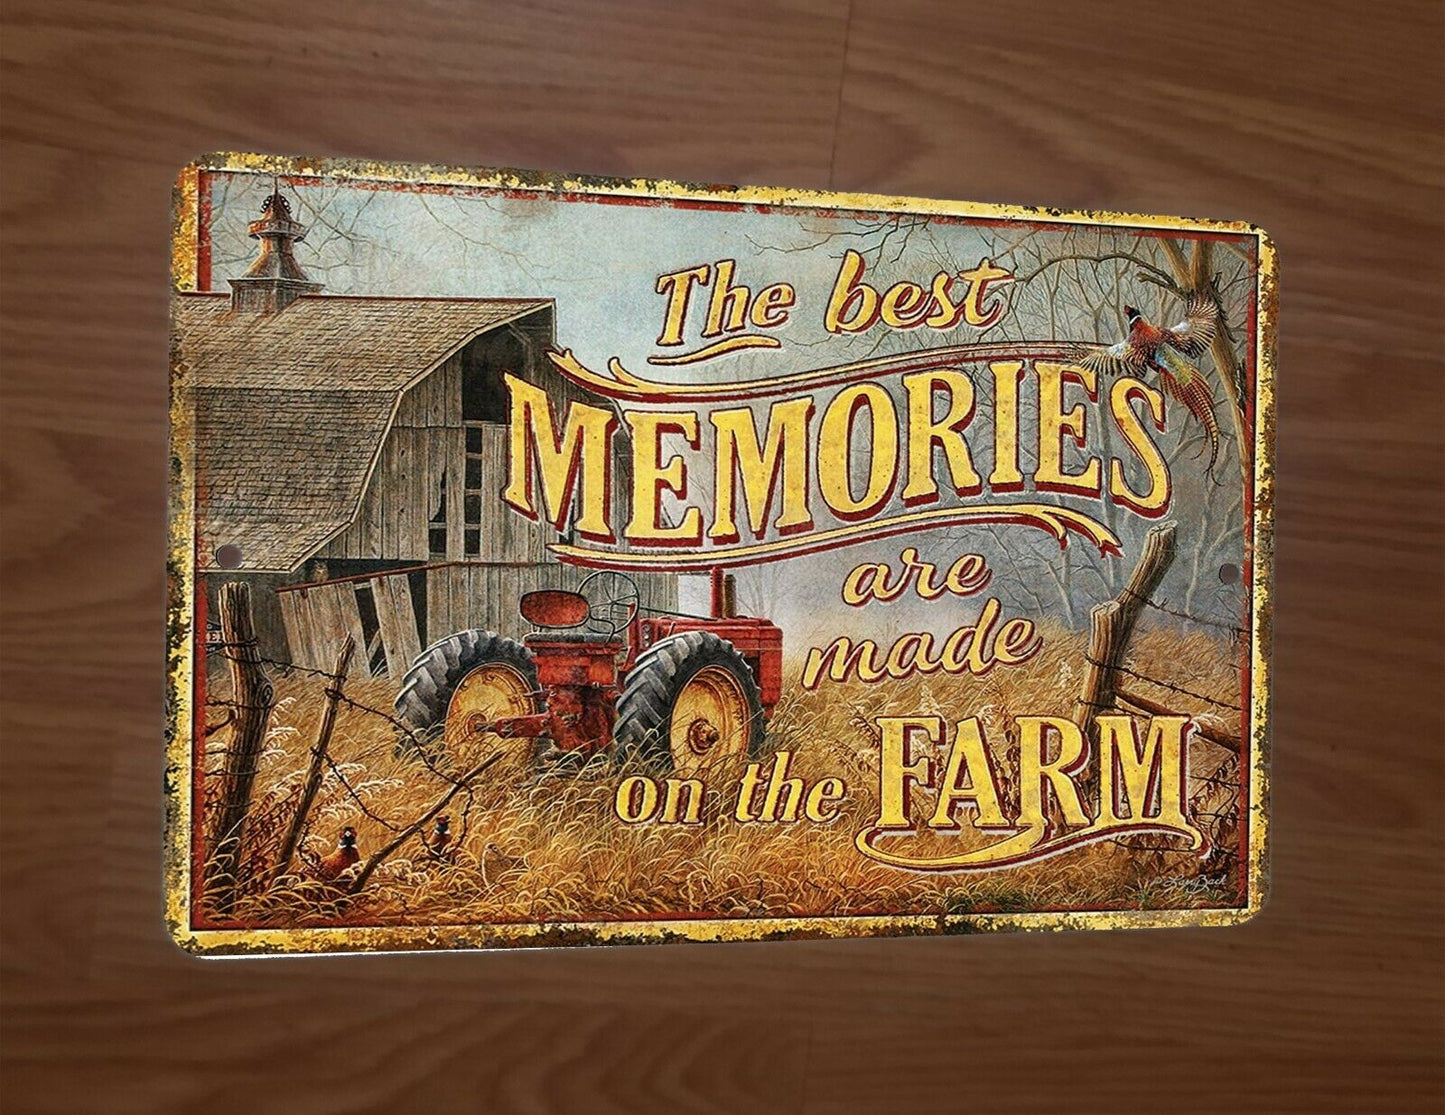 The Best Memories Are Made on the Farm 8x12 Metal Wall Sign